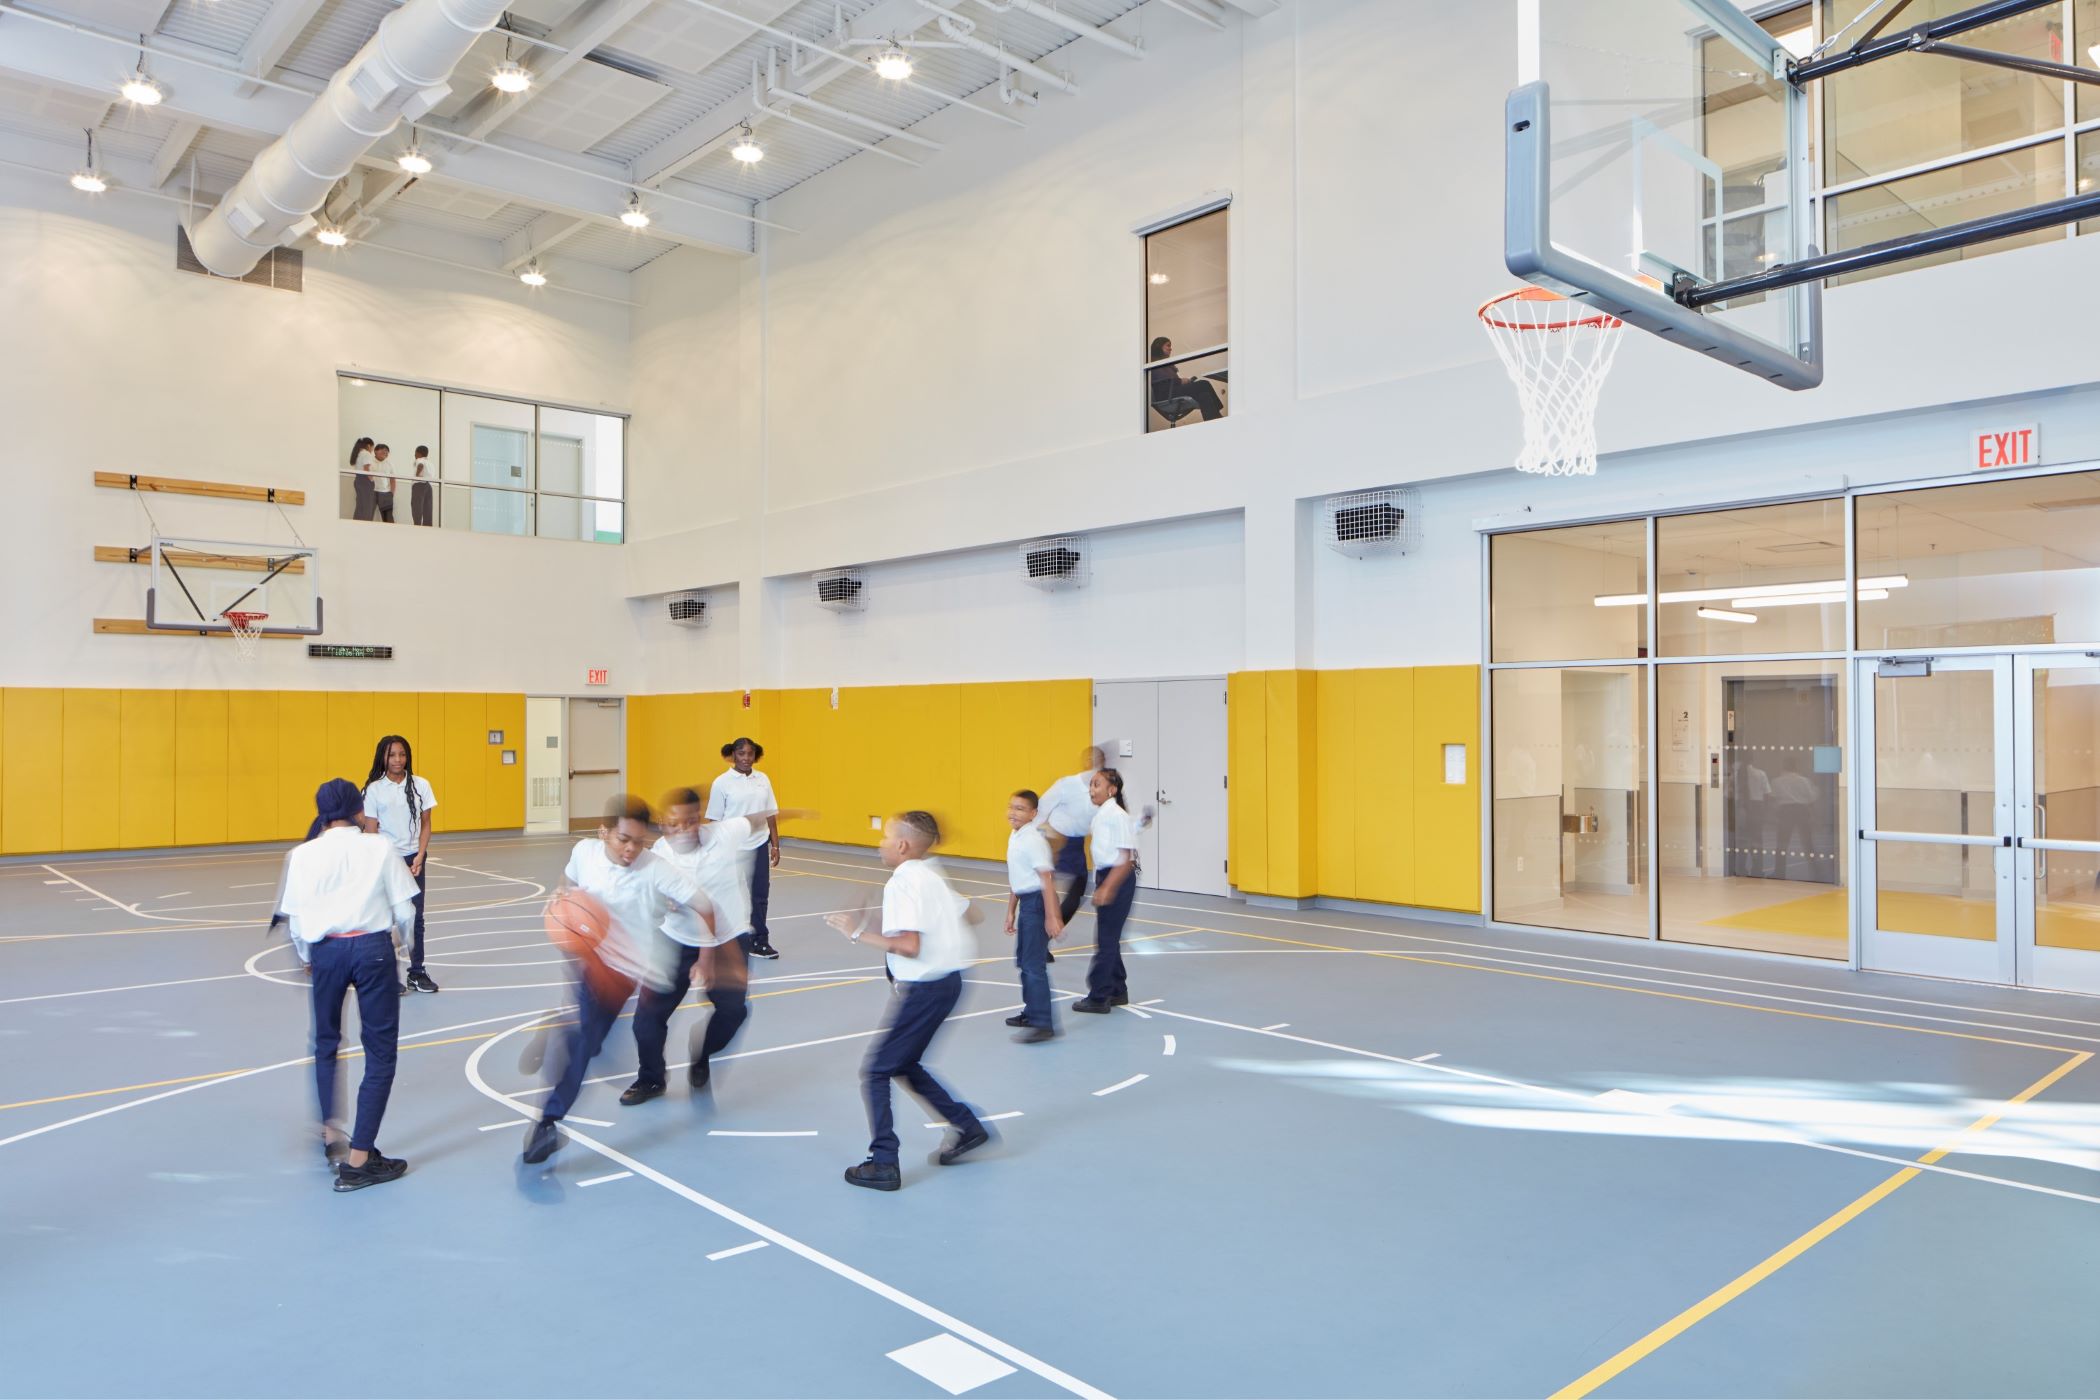 Kids playing basketball in the gymnasium